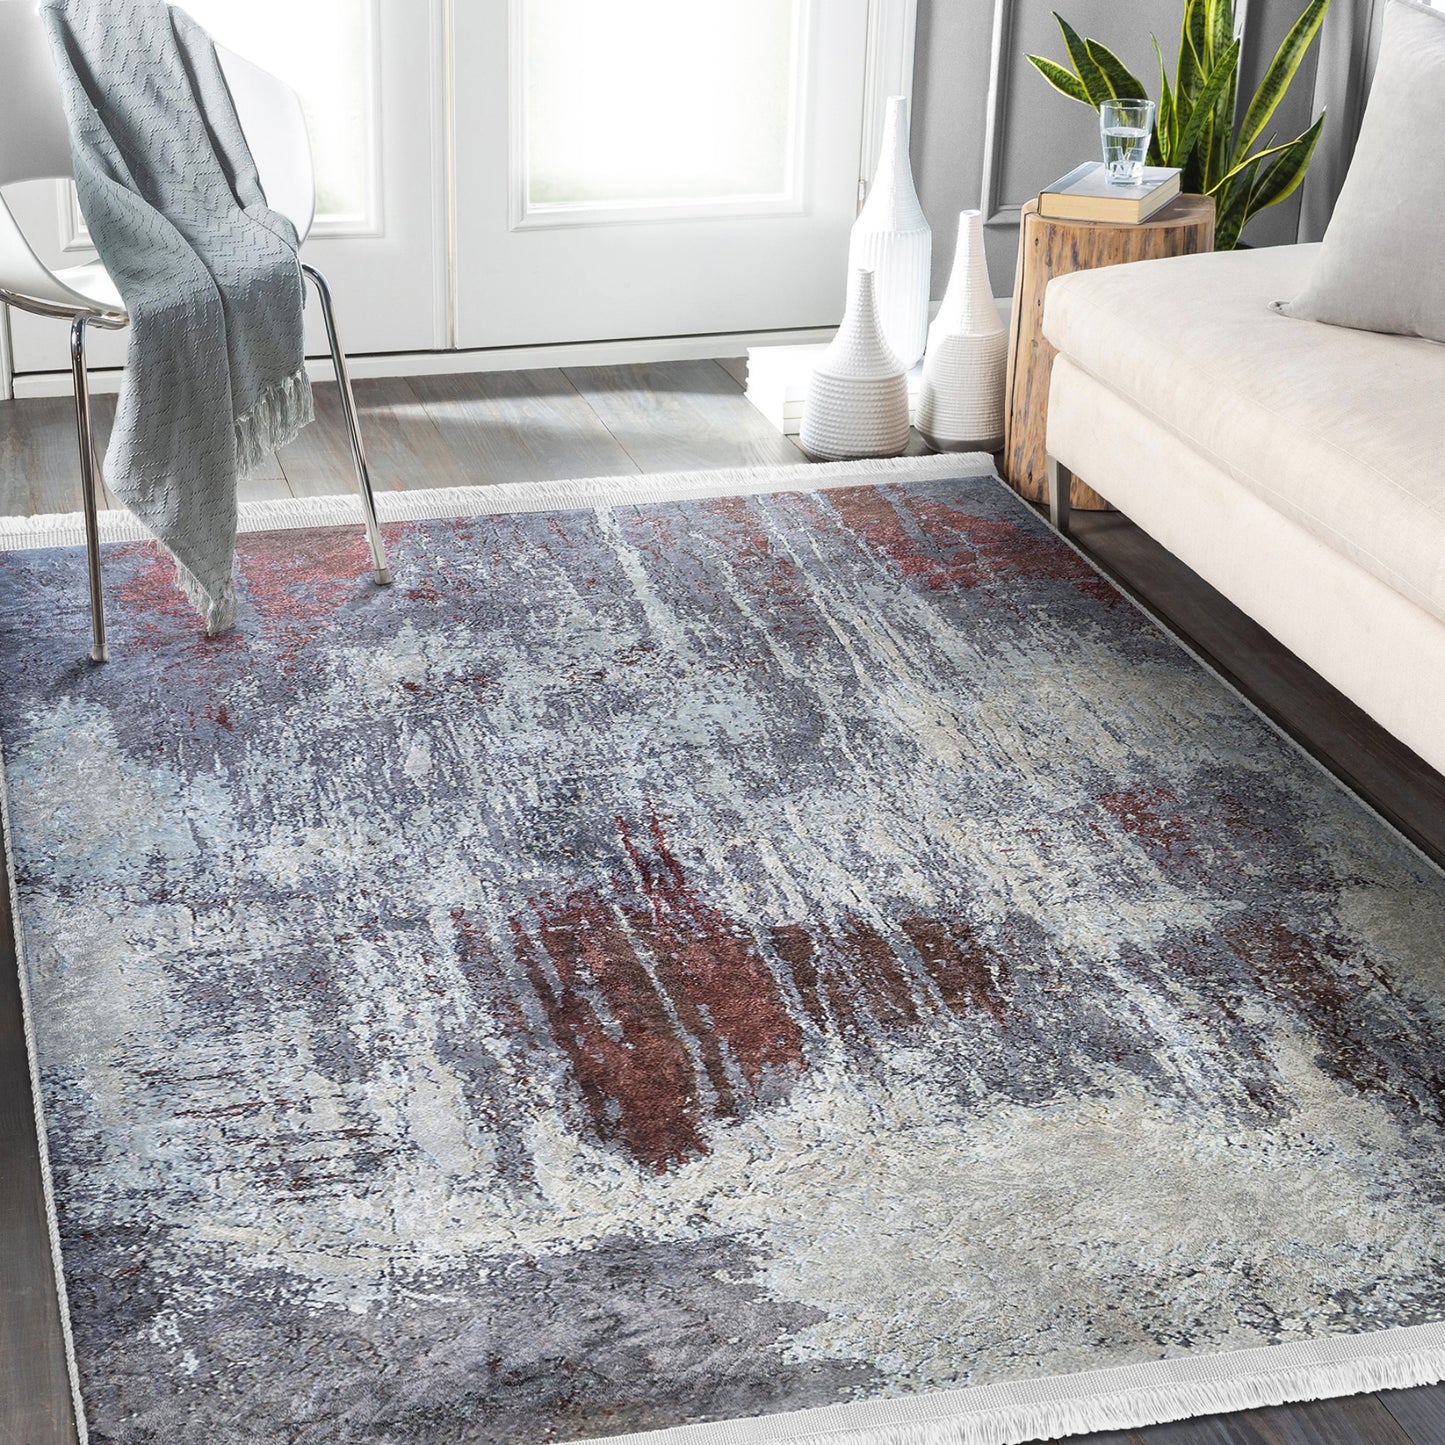 Functional and Stylish Rustic Area Rug for Your Living Space